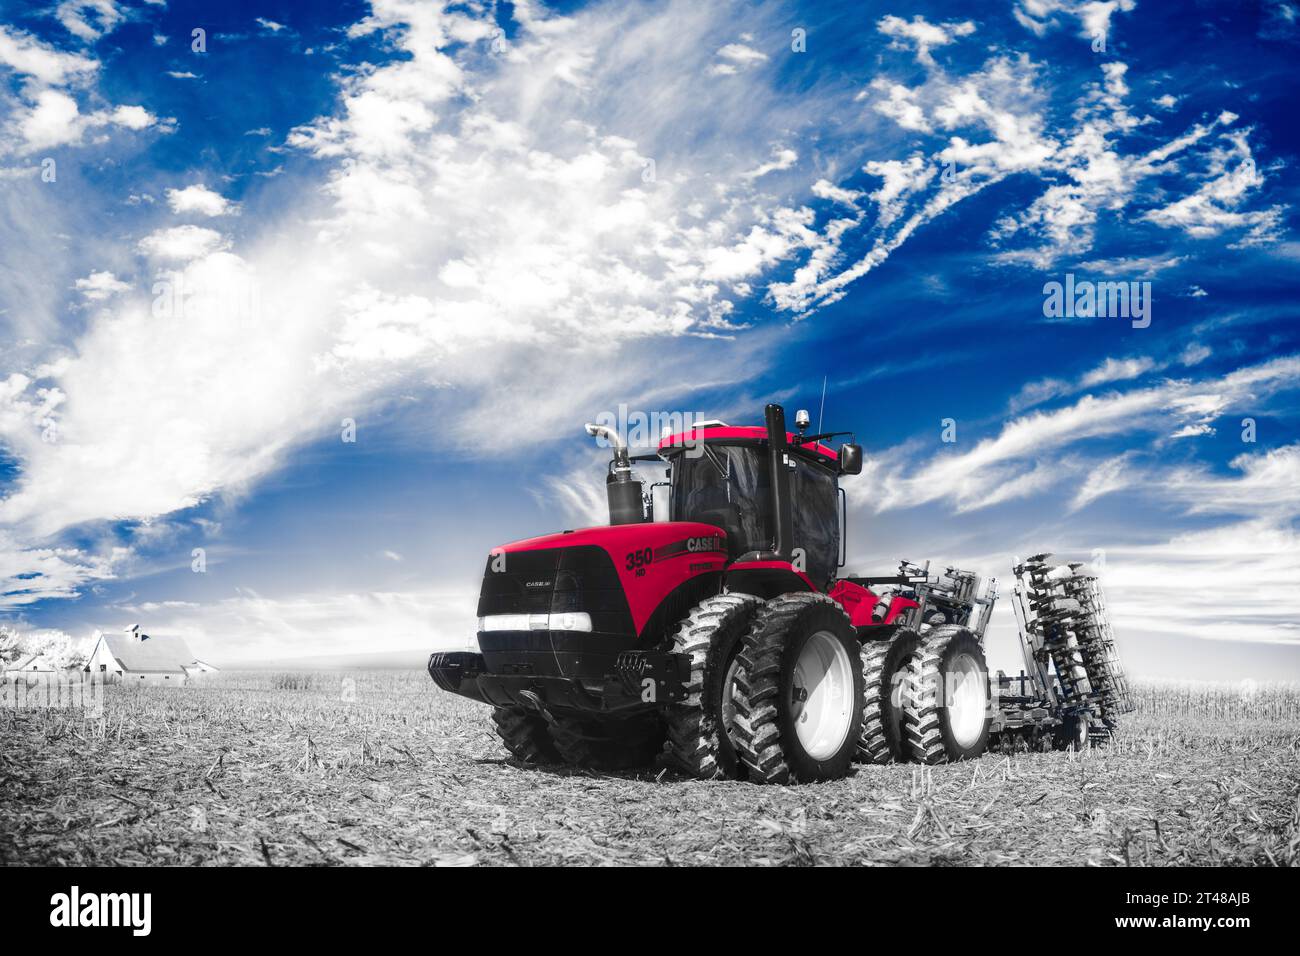 A red Case IH articulating tractor with a disc attached to it rests beneath a vibrant blue October sky in a field of corn stubble. Barn in distance. Stock Photo